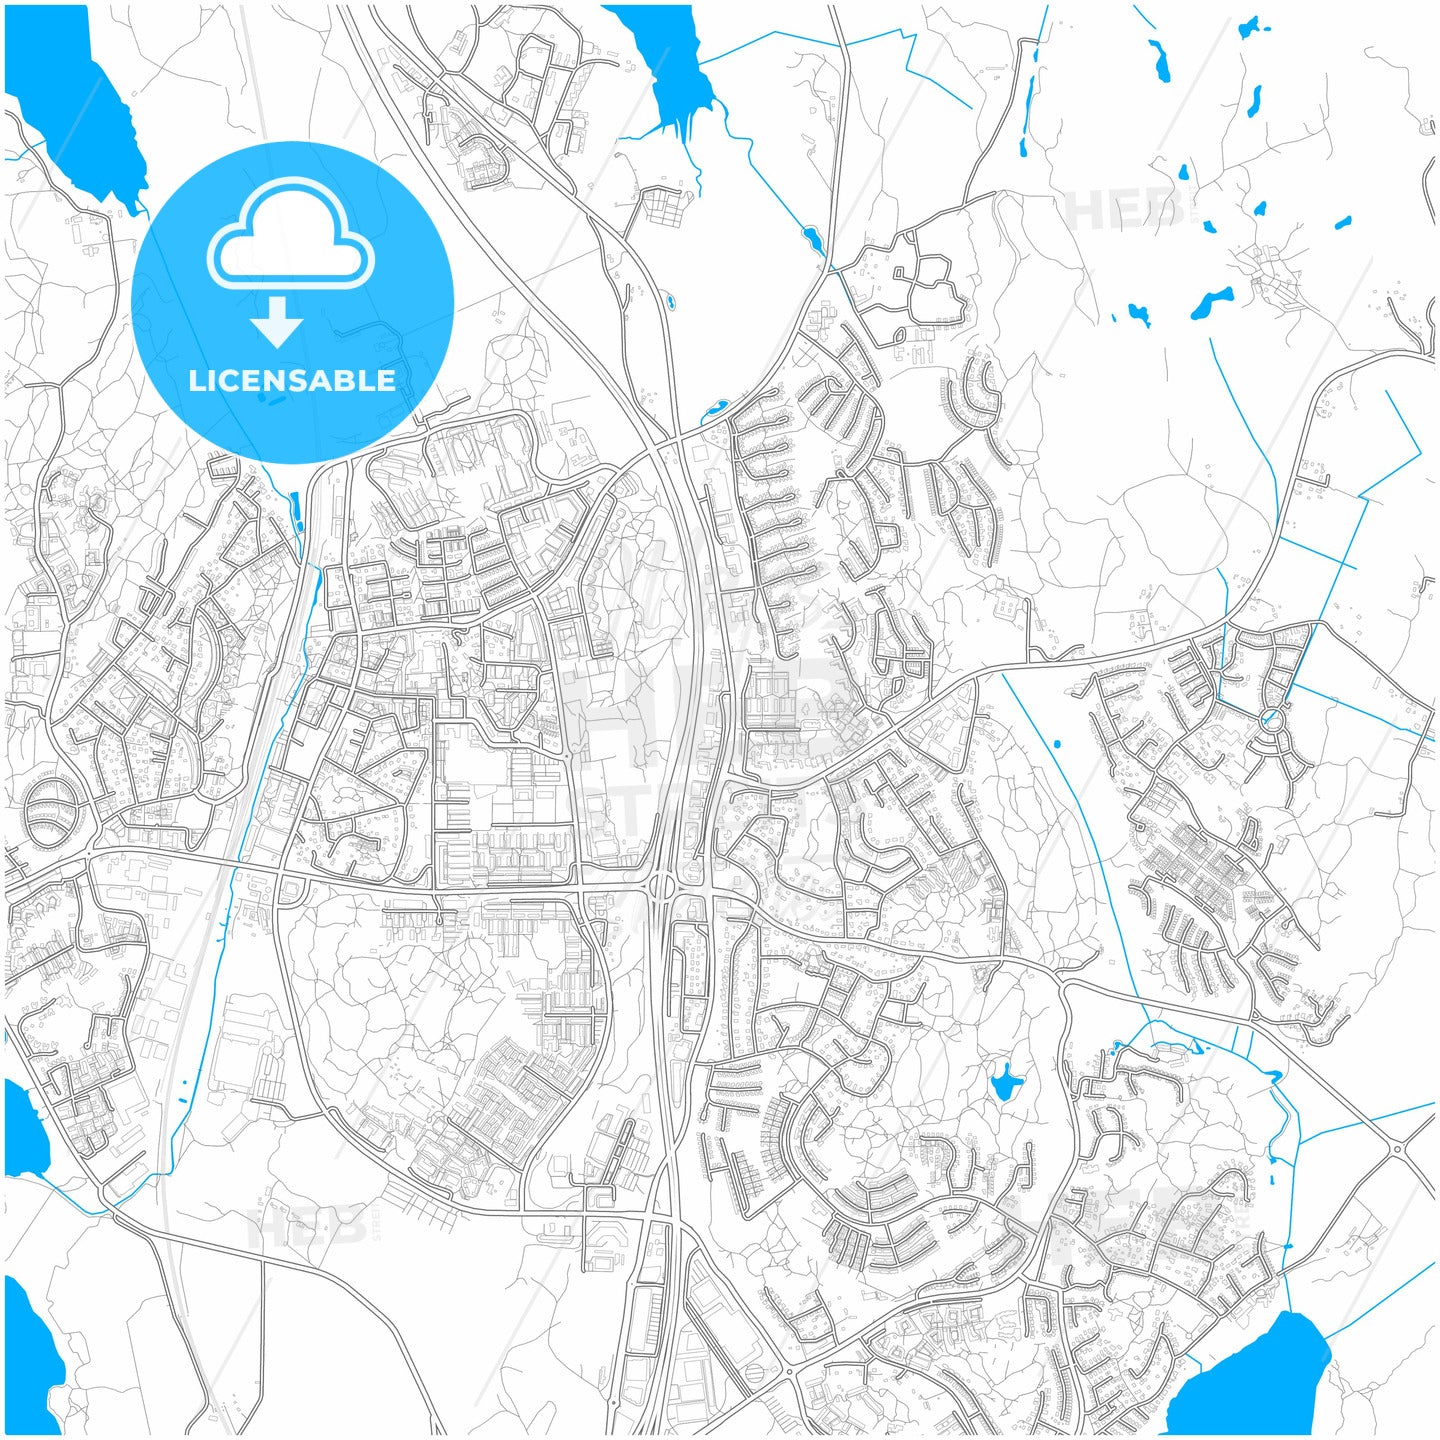 Upplands Väsby, Sweden, city map with high quality roads.